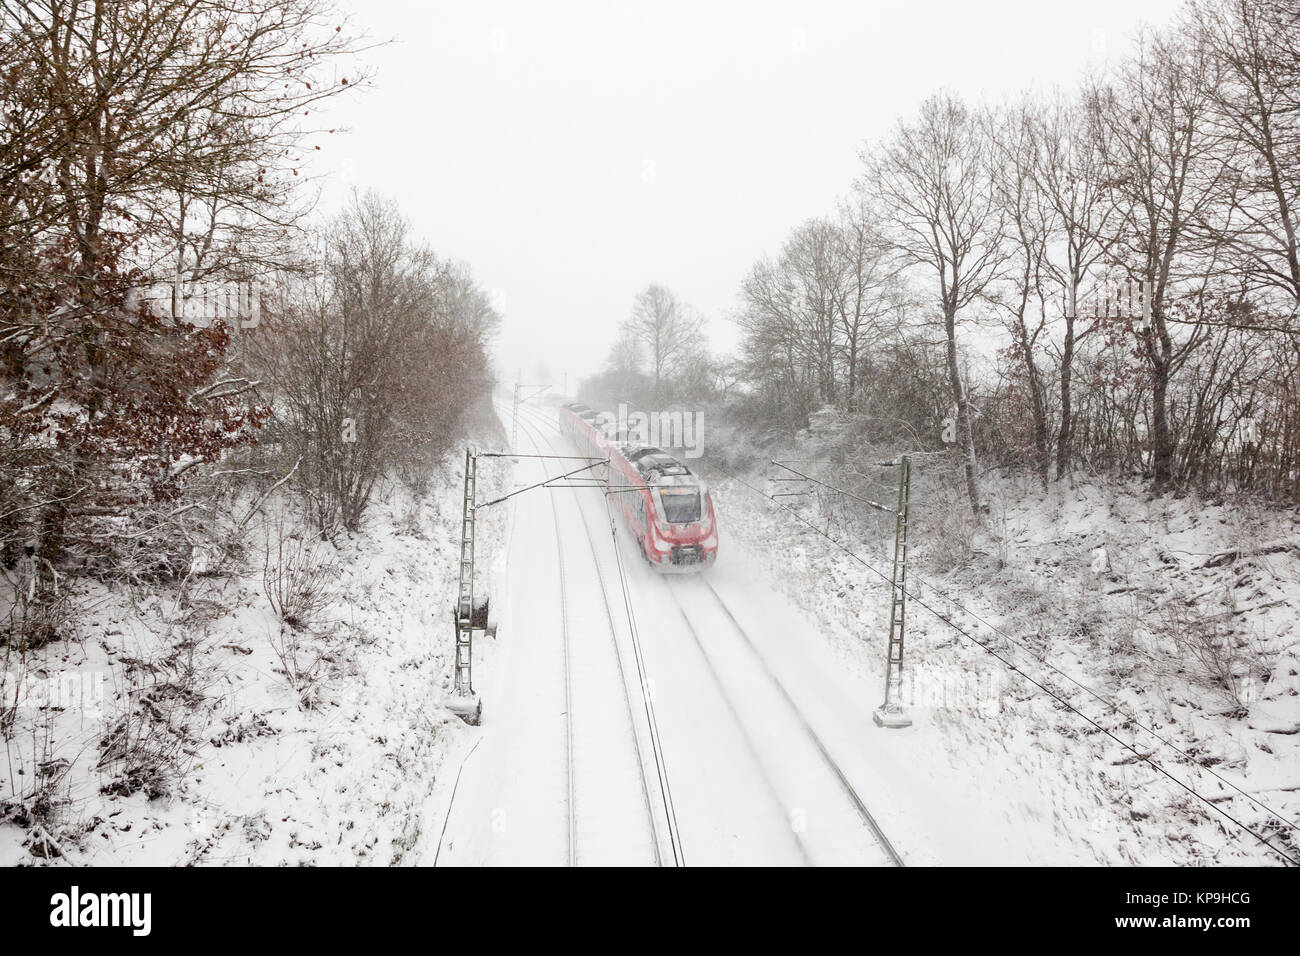 Passenger train passing by during a snowfall in winter Stock Photo